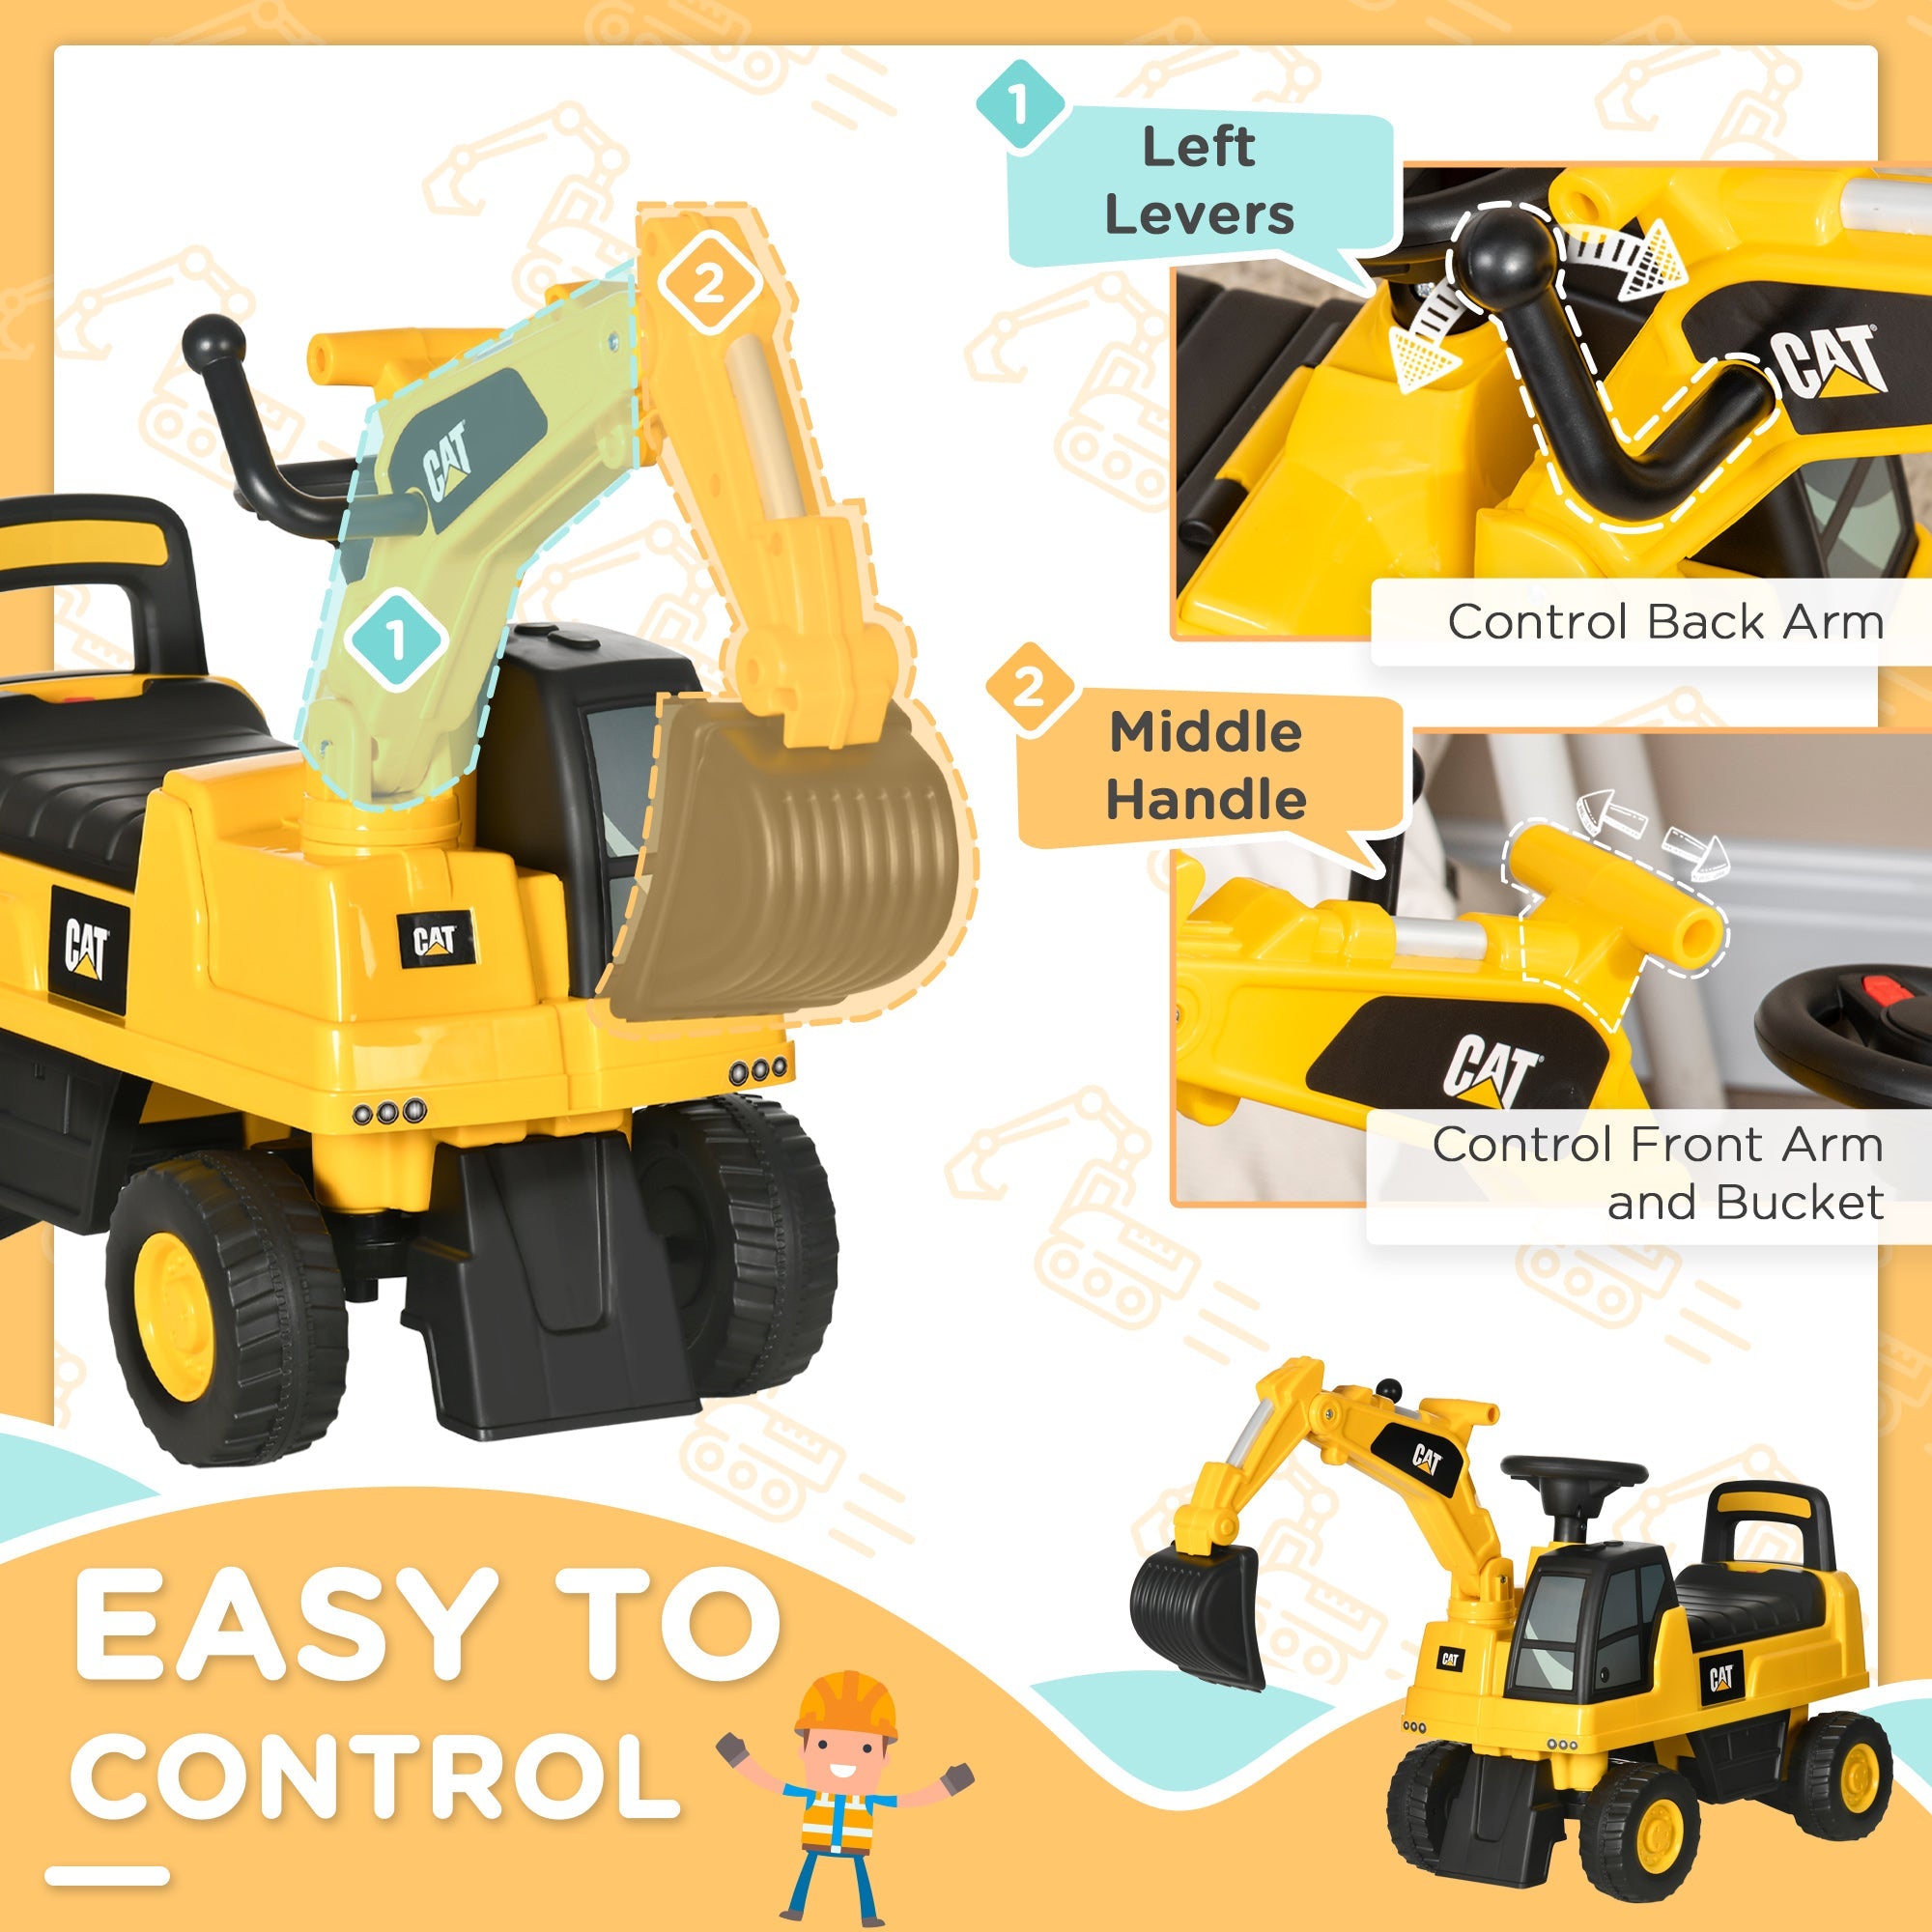 Maplin Plus CAT Licensed Kids Ride On Toy Digger with Manual Shovel & Horn for Ages 1-3 Years - maplin.co.uk